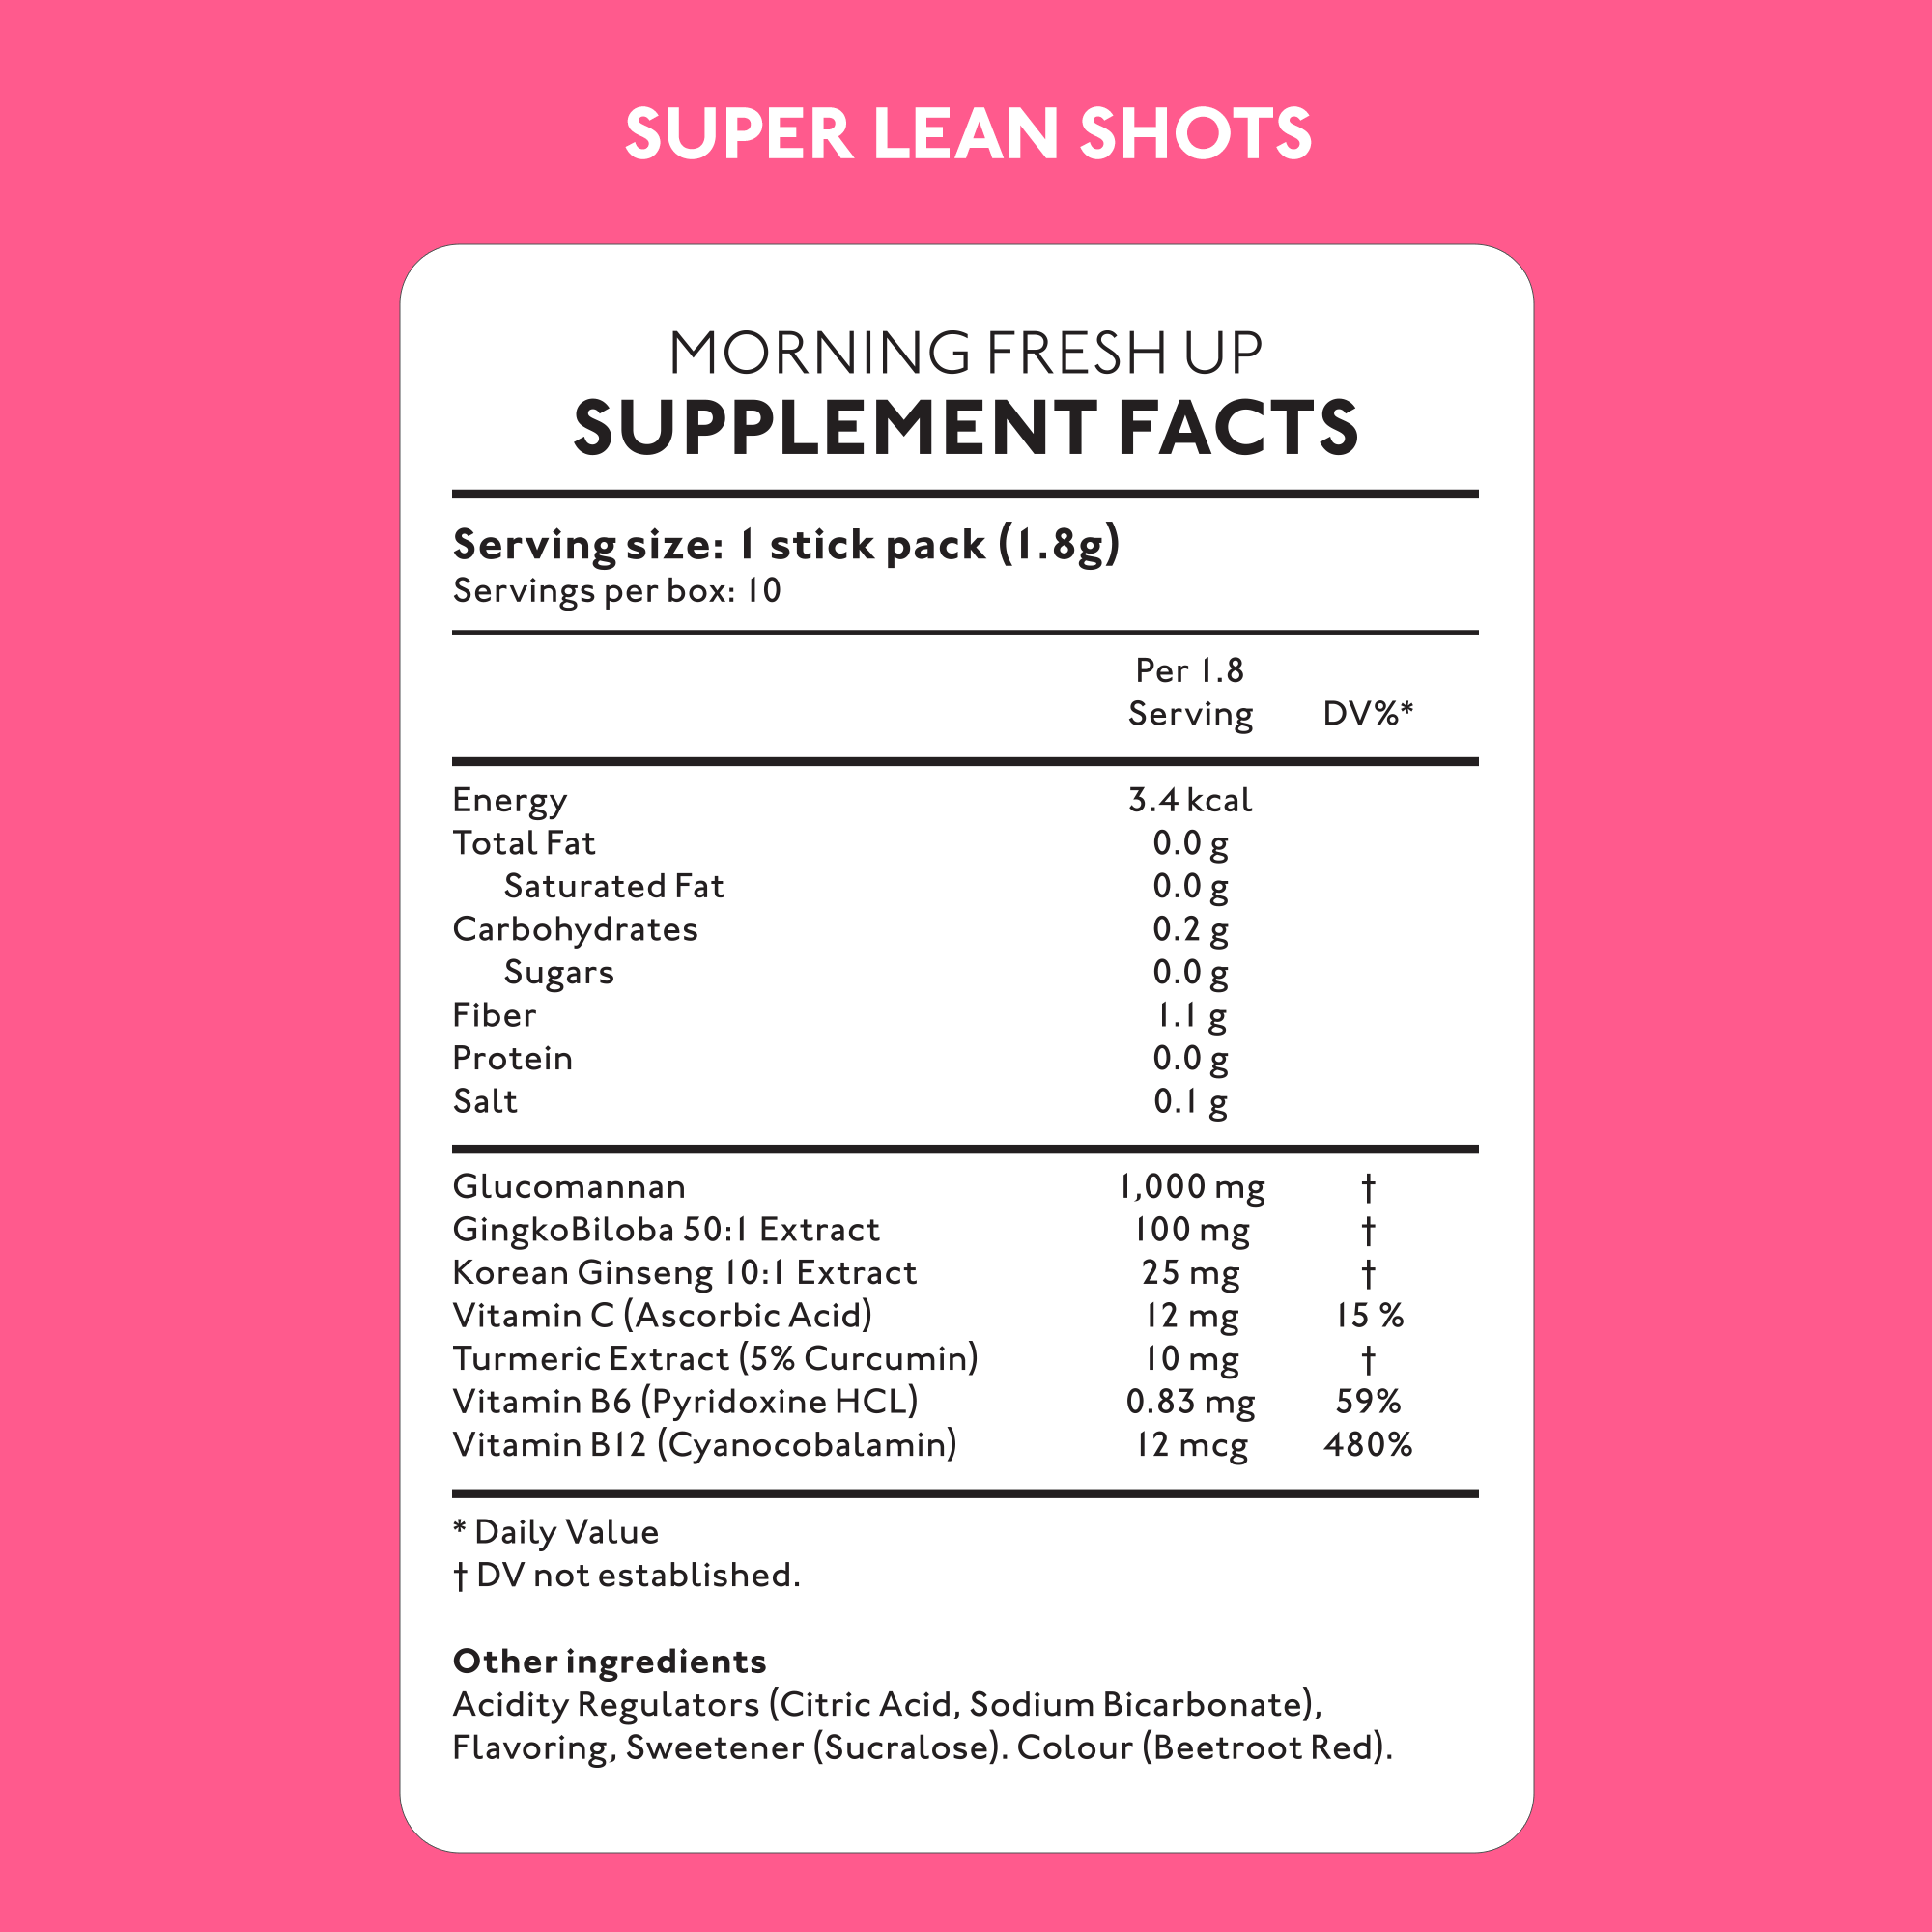 Morning Fresh Up Supplement Facts